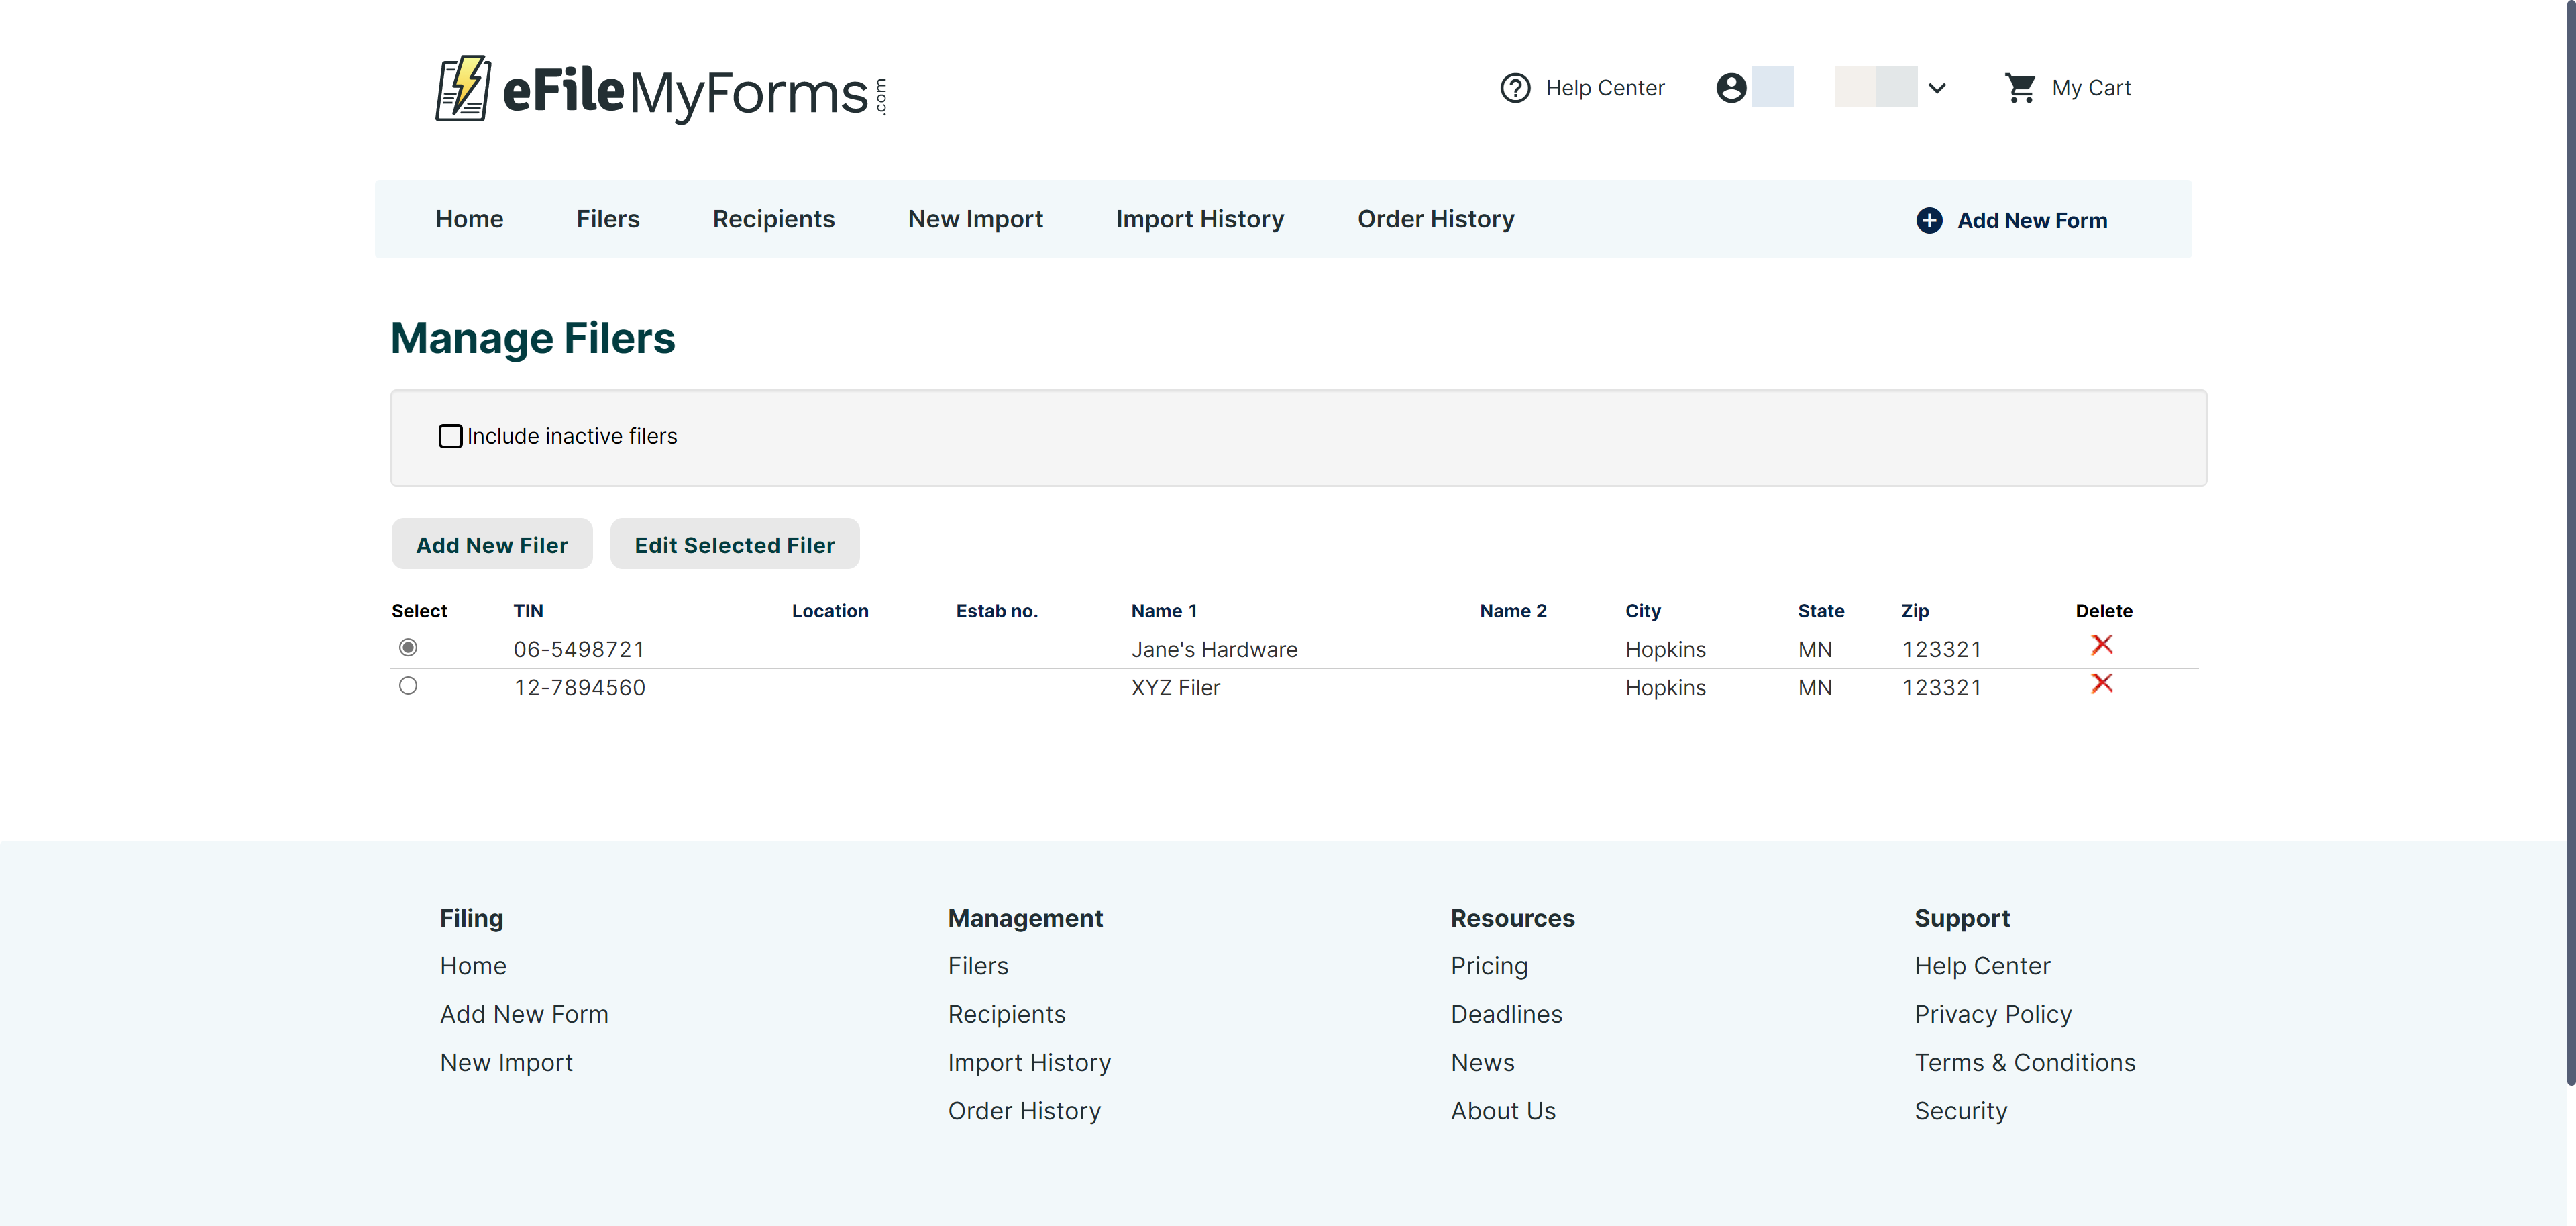 Image of the Manage Filers page.